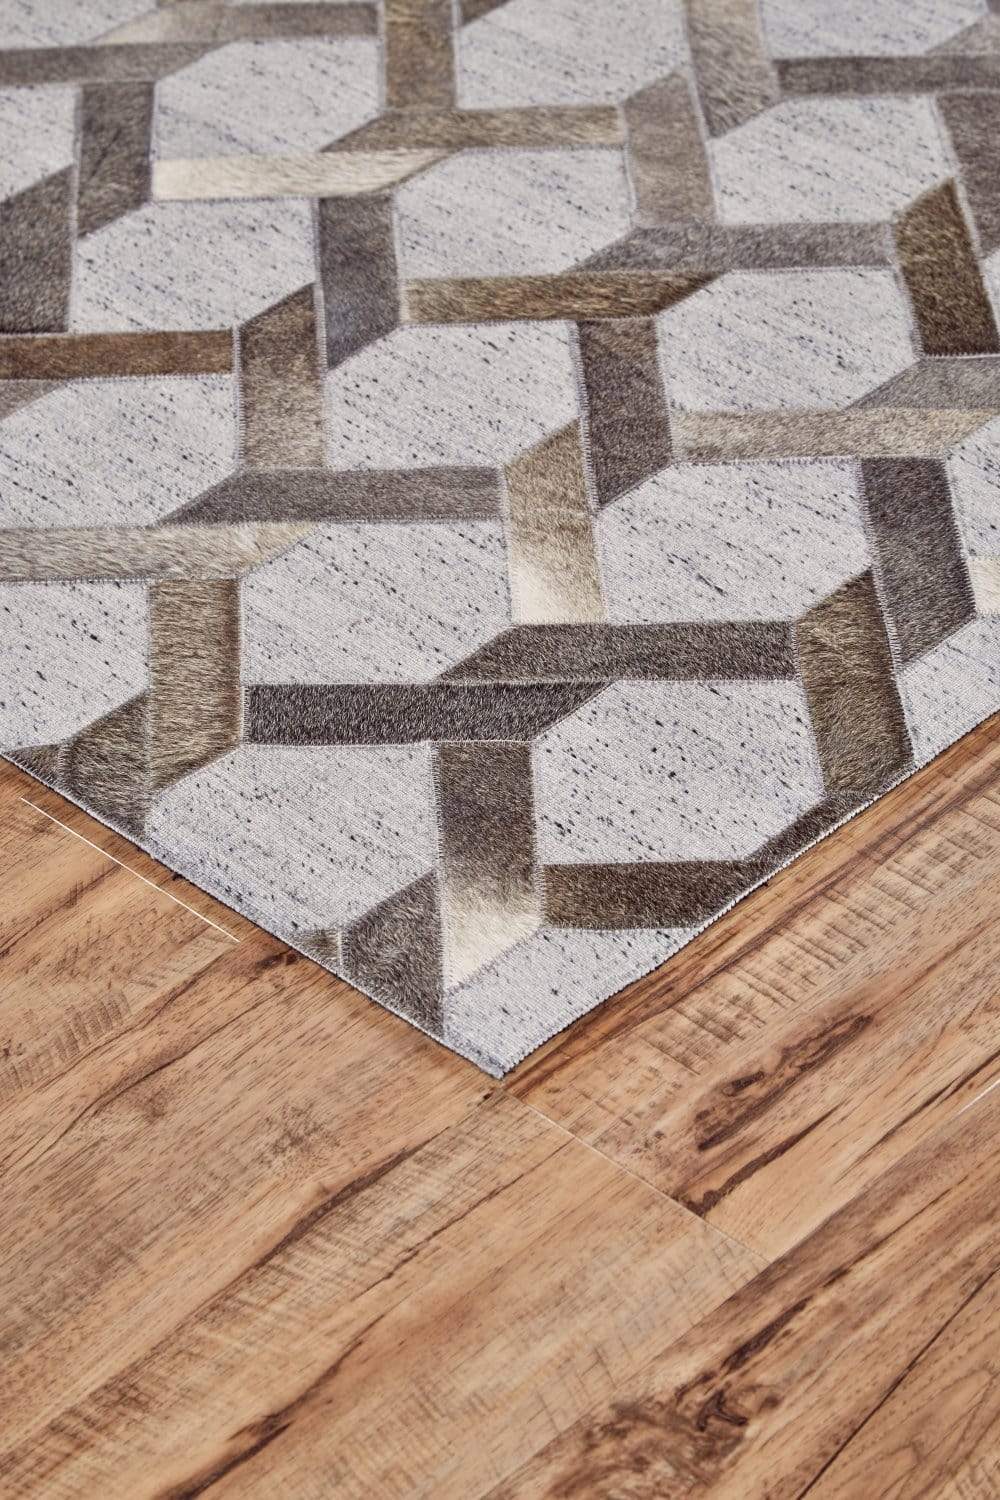 Feizy Feizy Fannin Handmade Leather Trellis Rug - Gray & Warm Taupe - Available in 4 Sizes